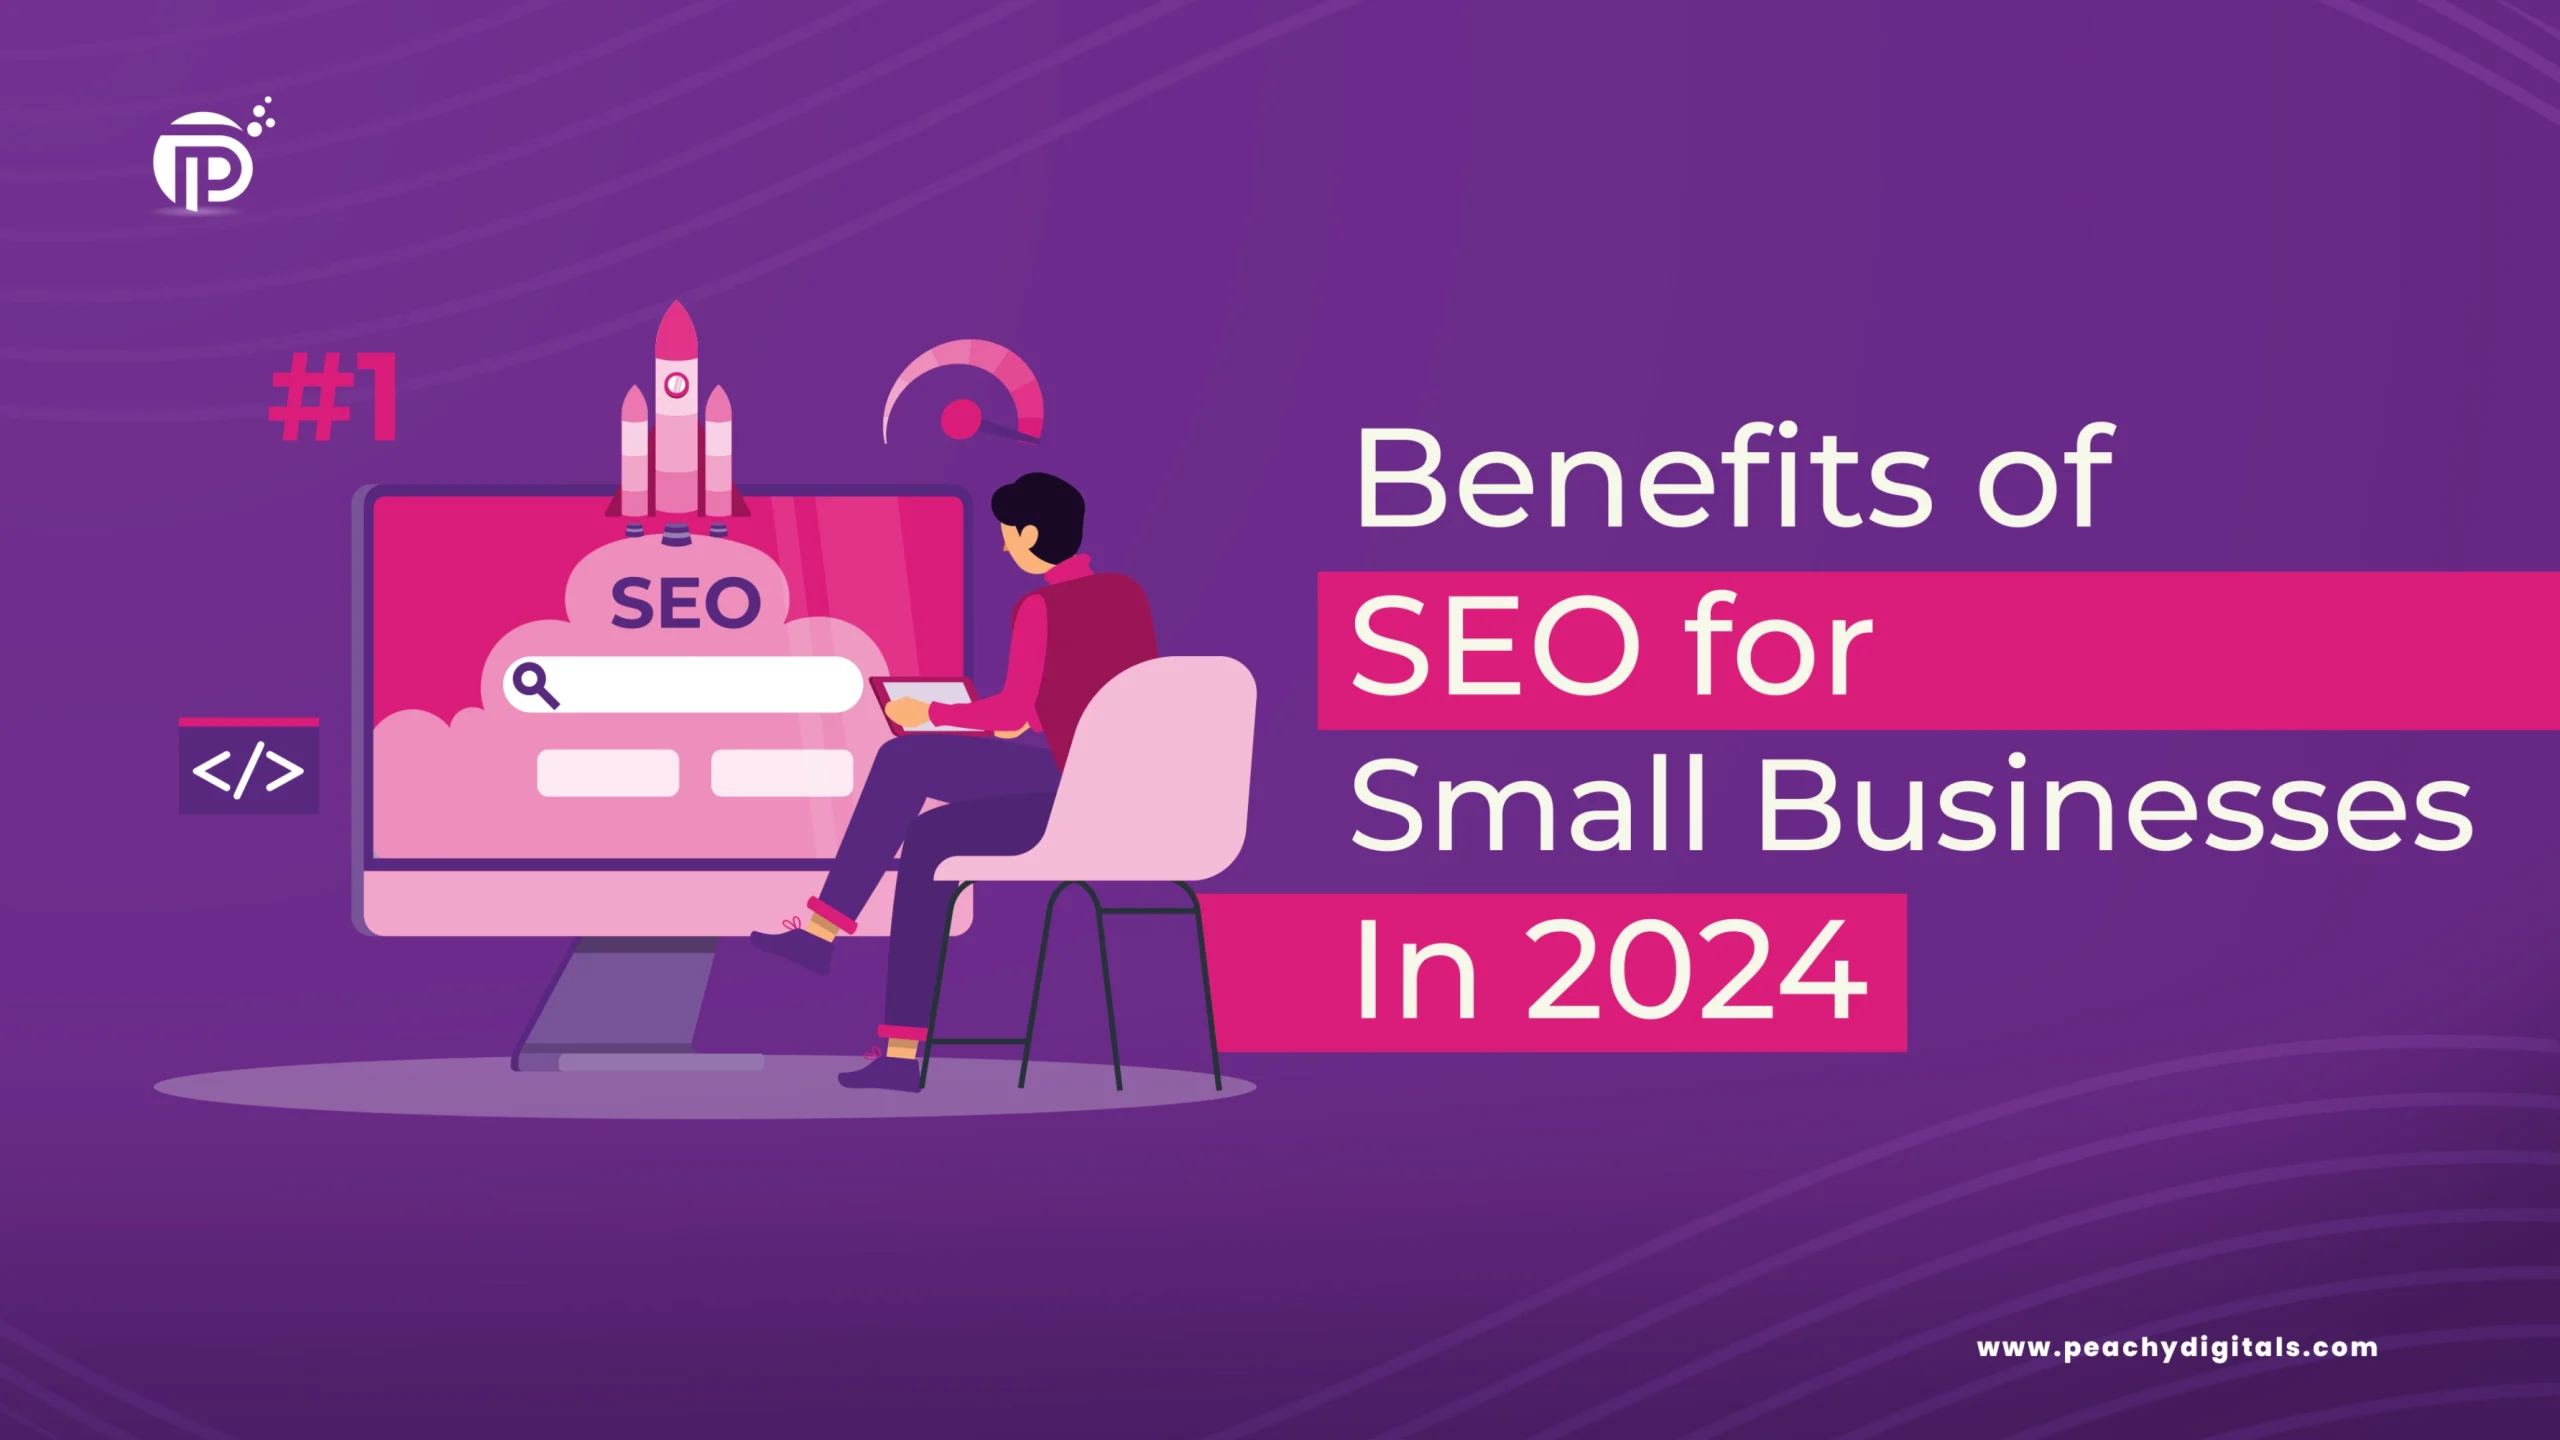 Benefits of SEO-For Small Businesses in 2024